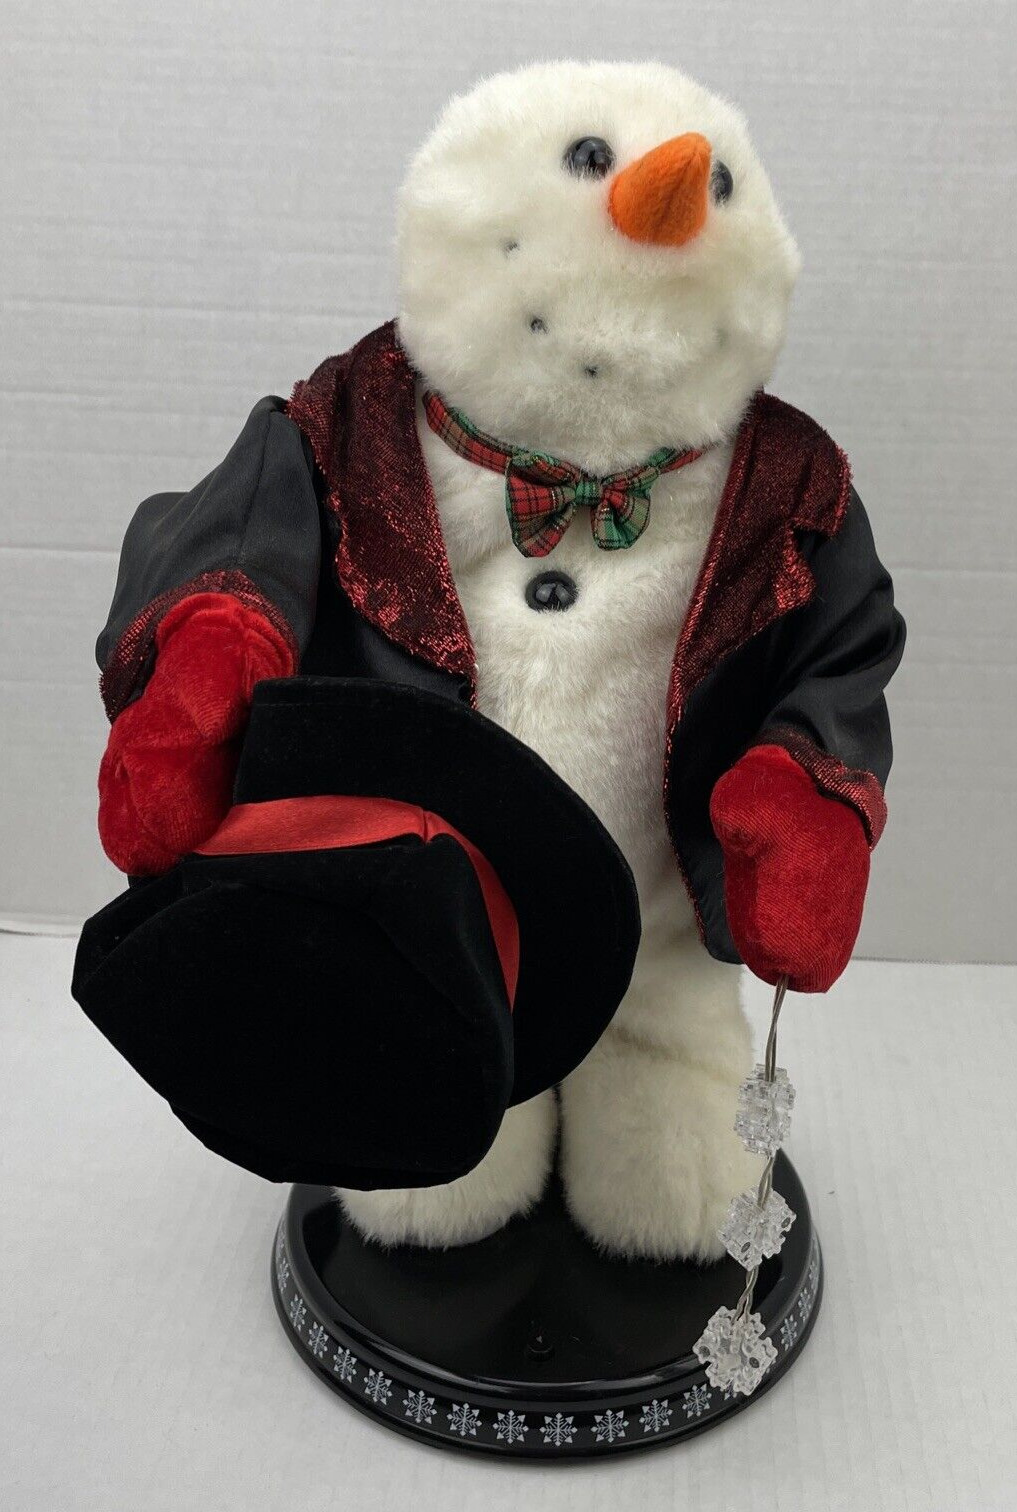 Gemmy Holiday Mr. Snow Business Animated Singing Dancing Snowman Lights Video